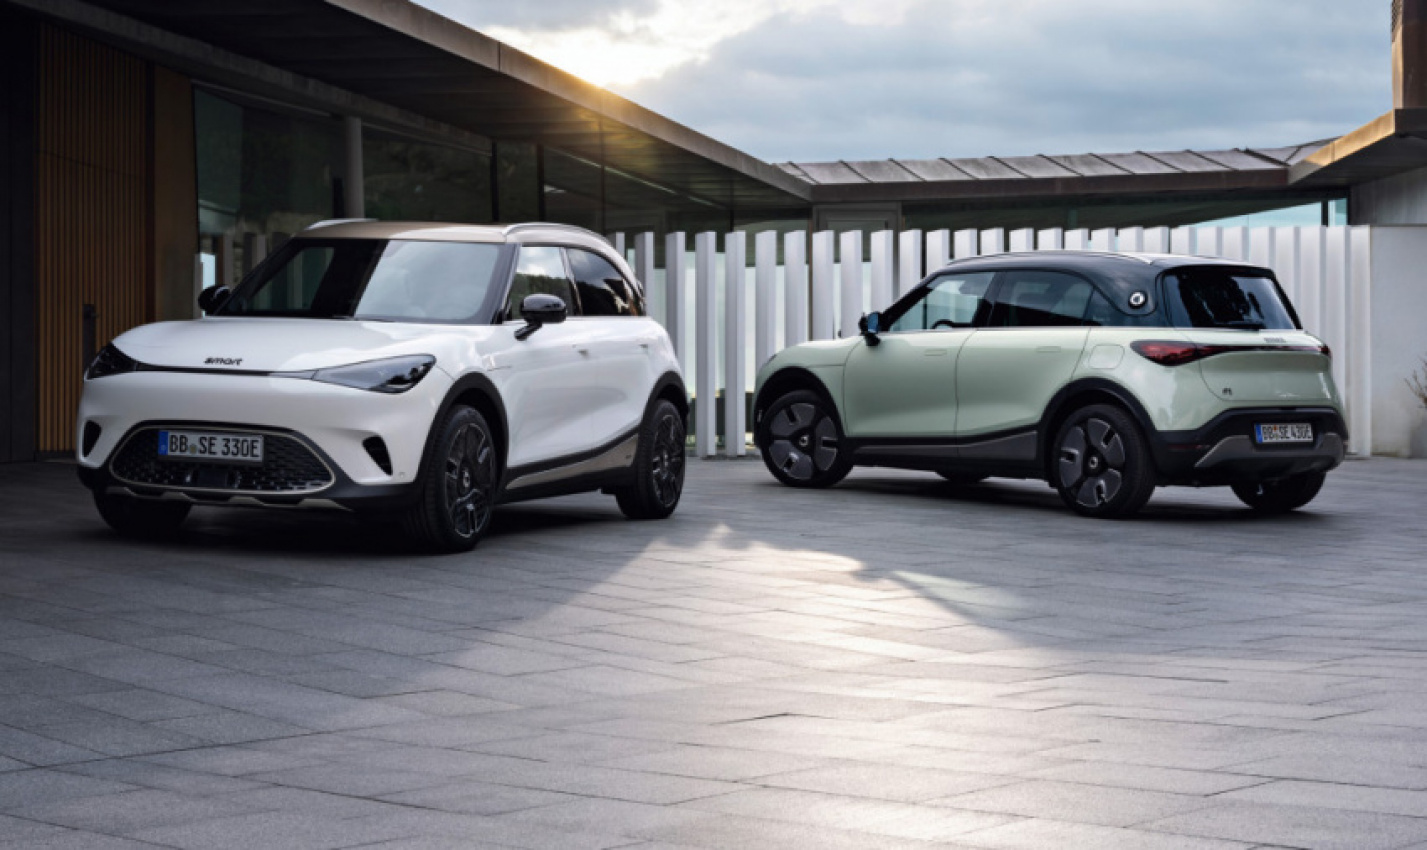 autos, cars, smart, electric cars, smart news, spy shots, suvs, videos, youtube, 2023 smart #1 crossover revealed: rebooted smart launches first salvo